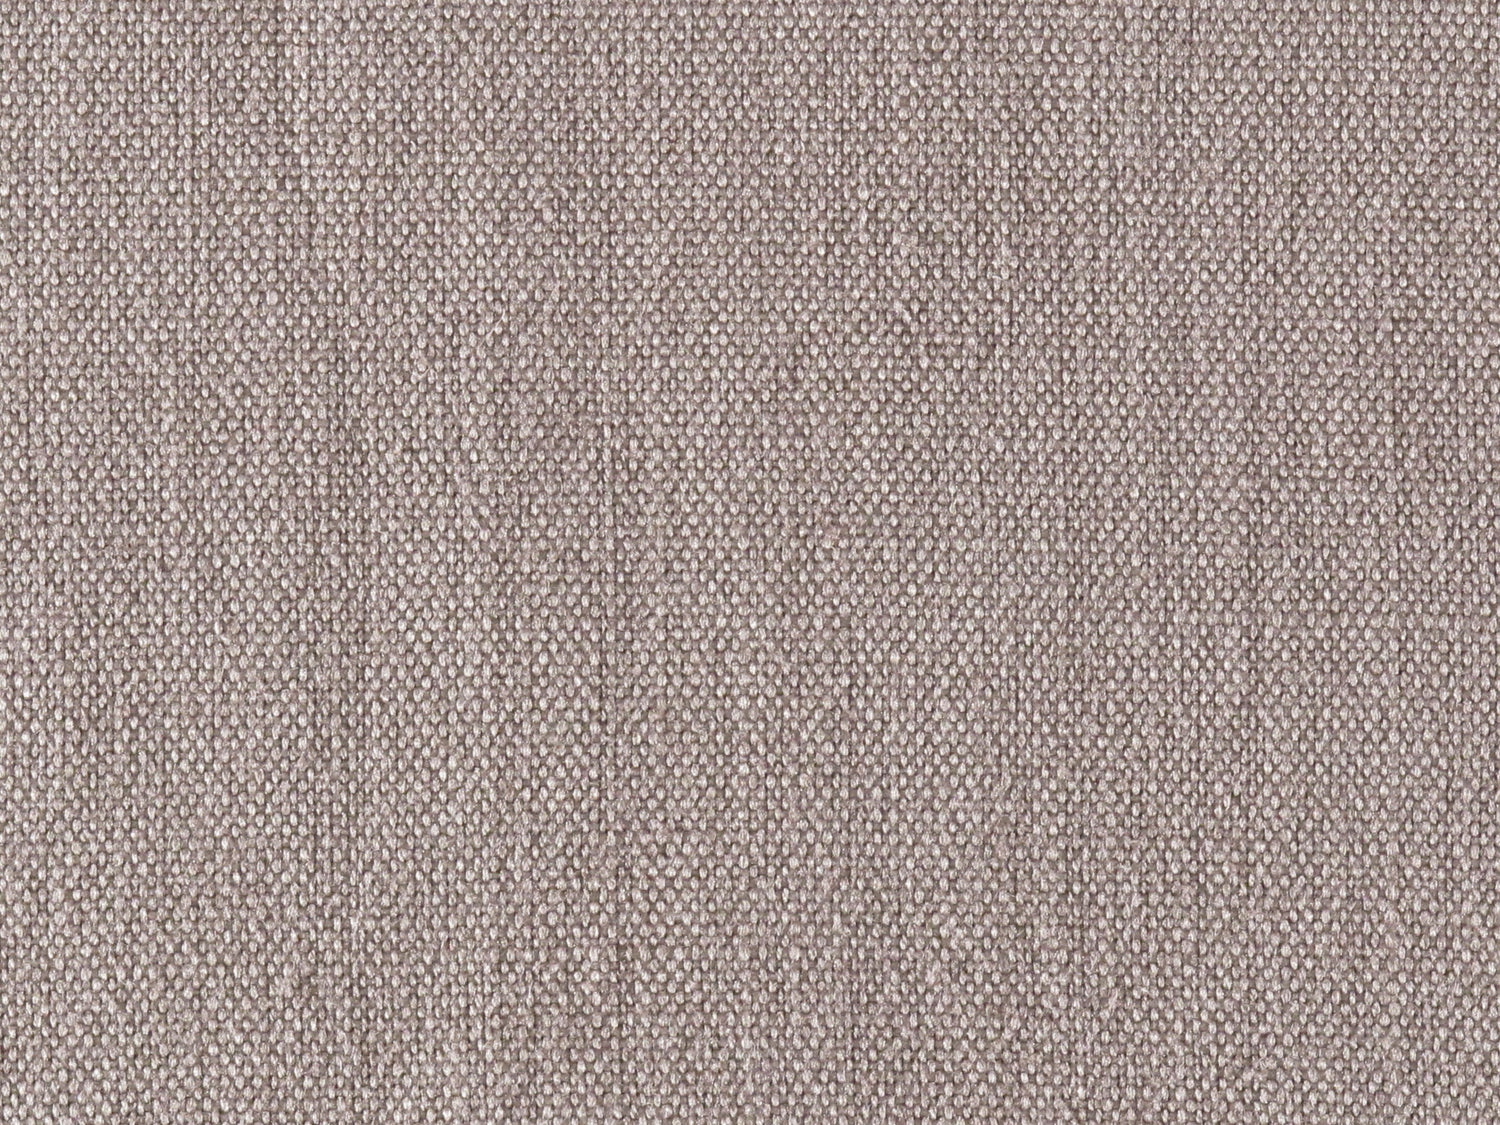 Lakeside Linen fabric in flint color - pattern number PK 0015LAKE - by Scalamandre in the Old World Weavers collection